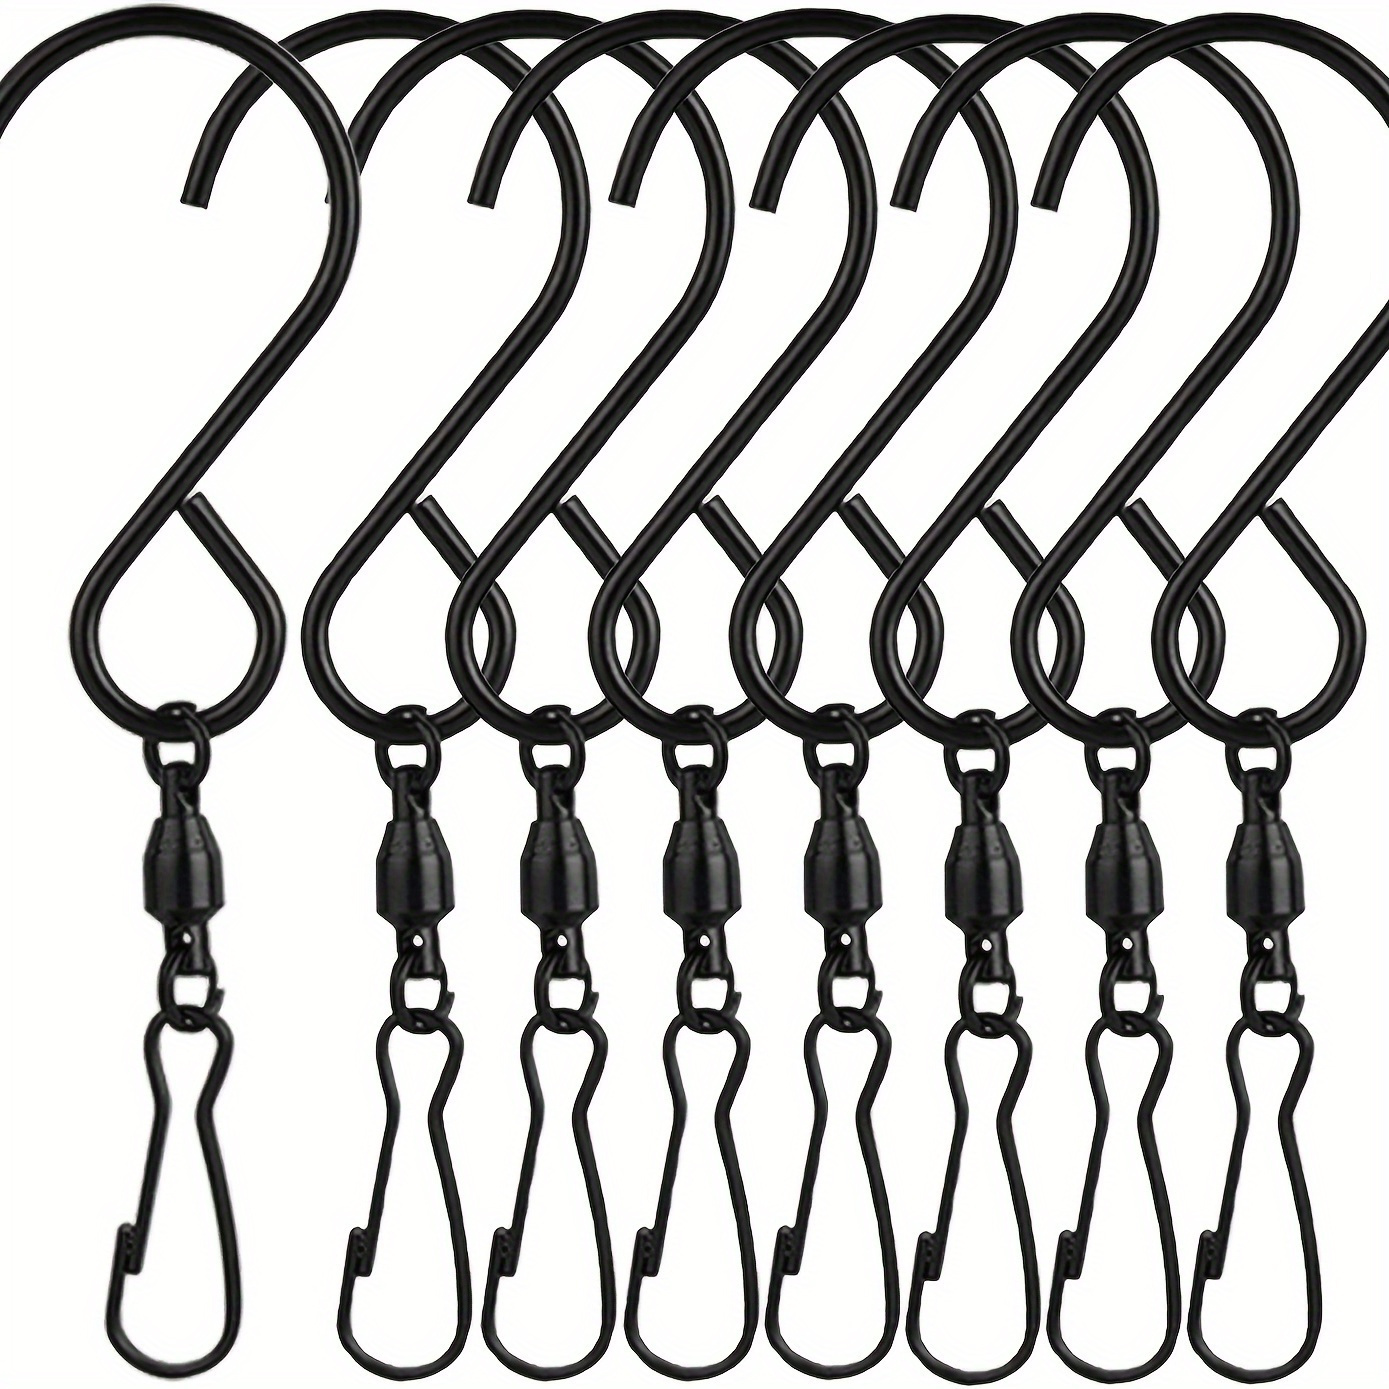 

8pcs Black S-type Stainless Steel Swivel Hooks, With 360 Degree Rotating Bearing Clips, For Hanging Wind Chimes, Bird Feeders, Crystal , Party Supplies